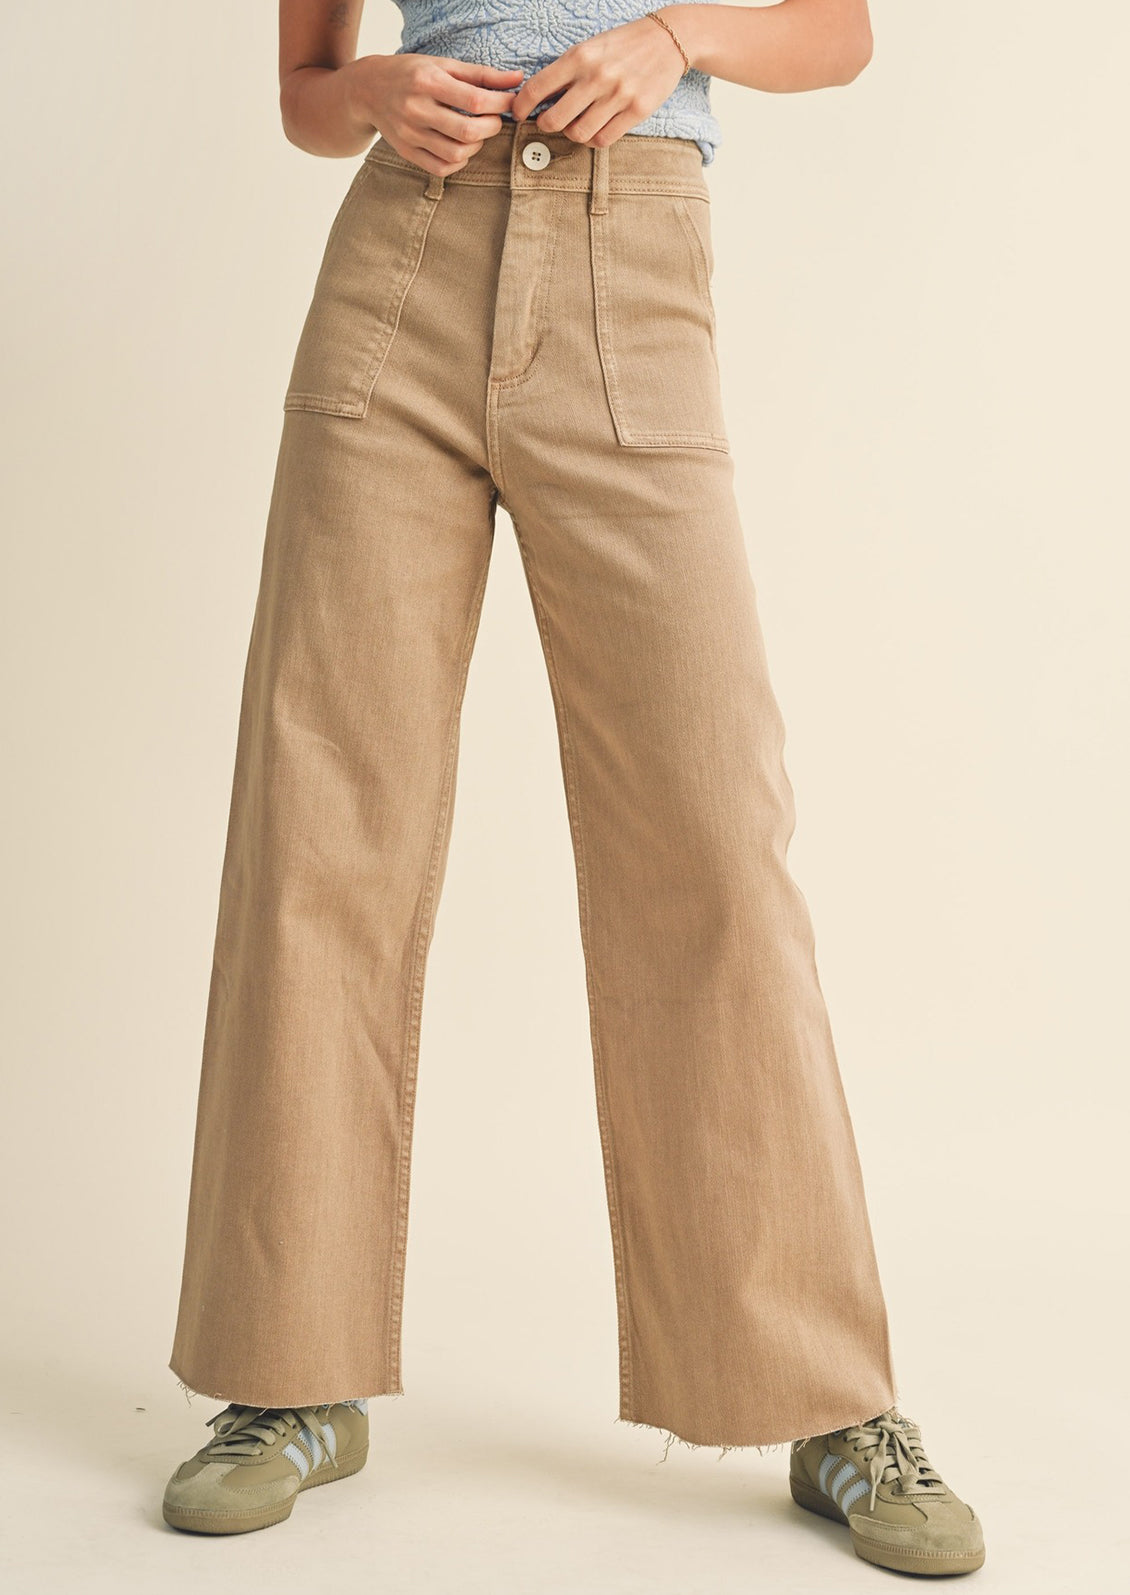 A pair of light brown wide leg pants with front patch pockets.